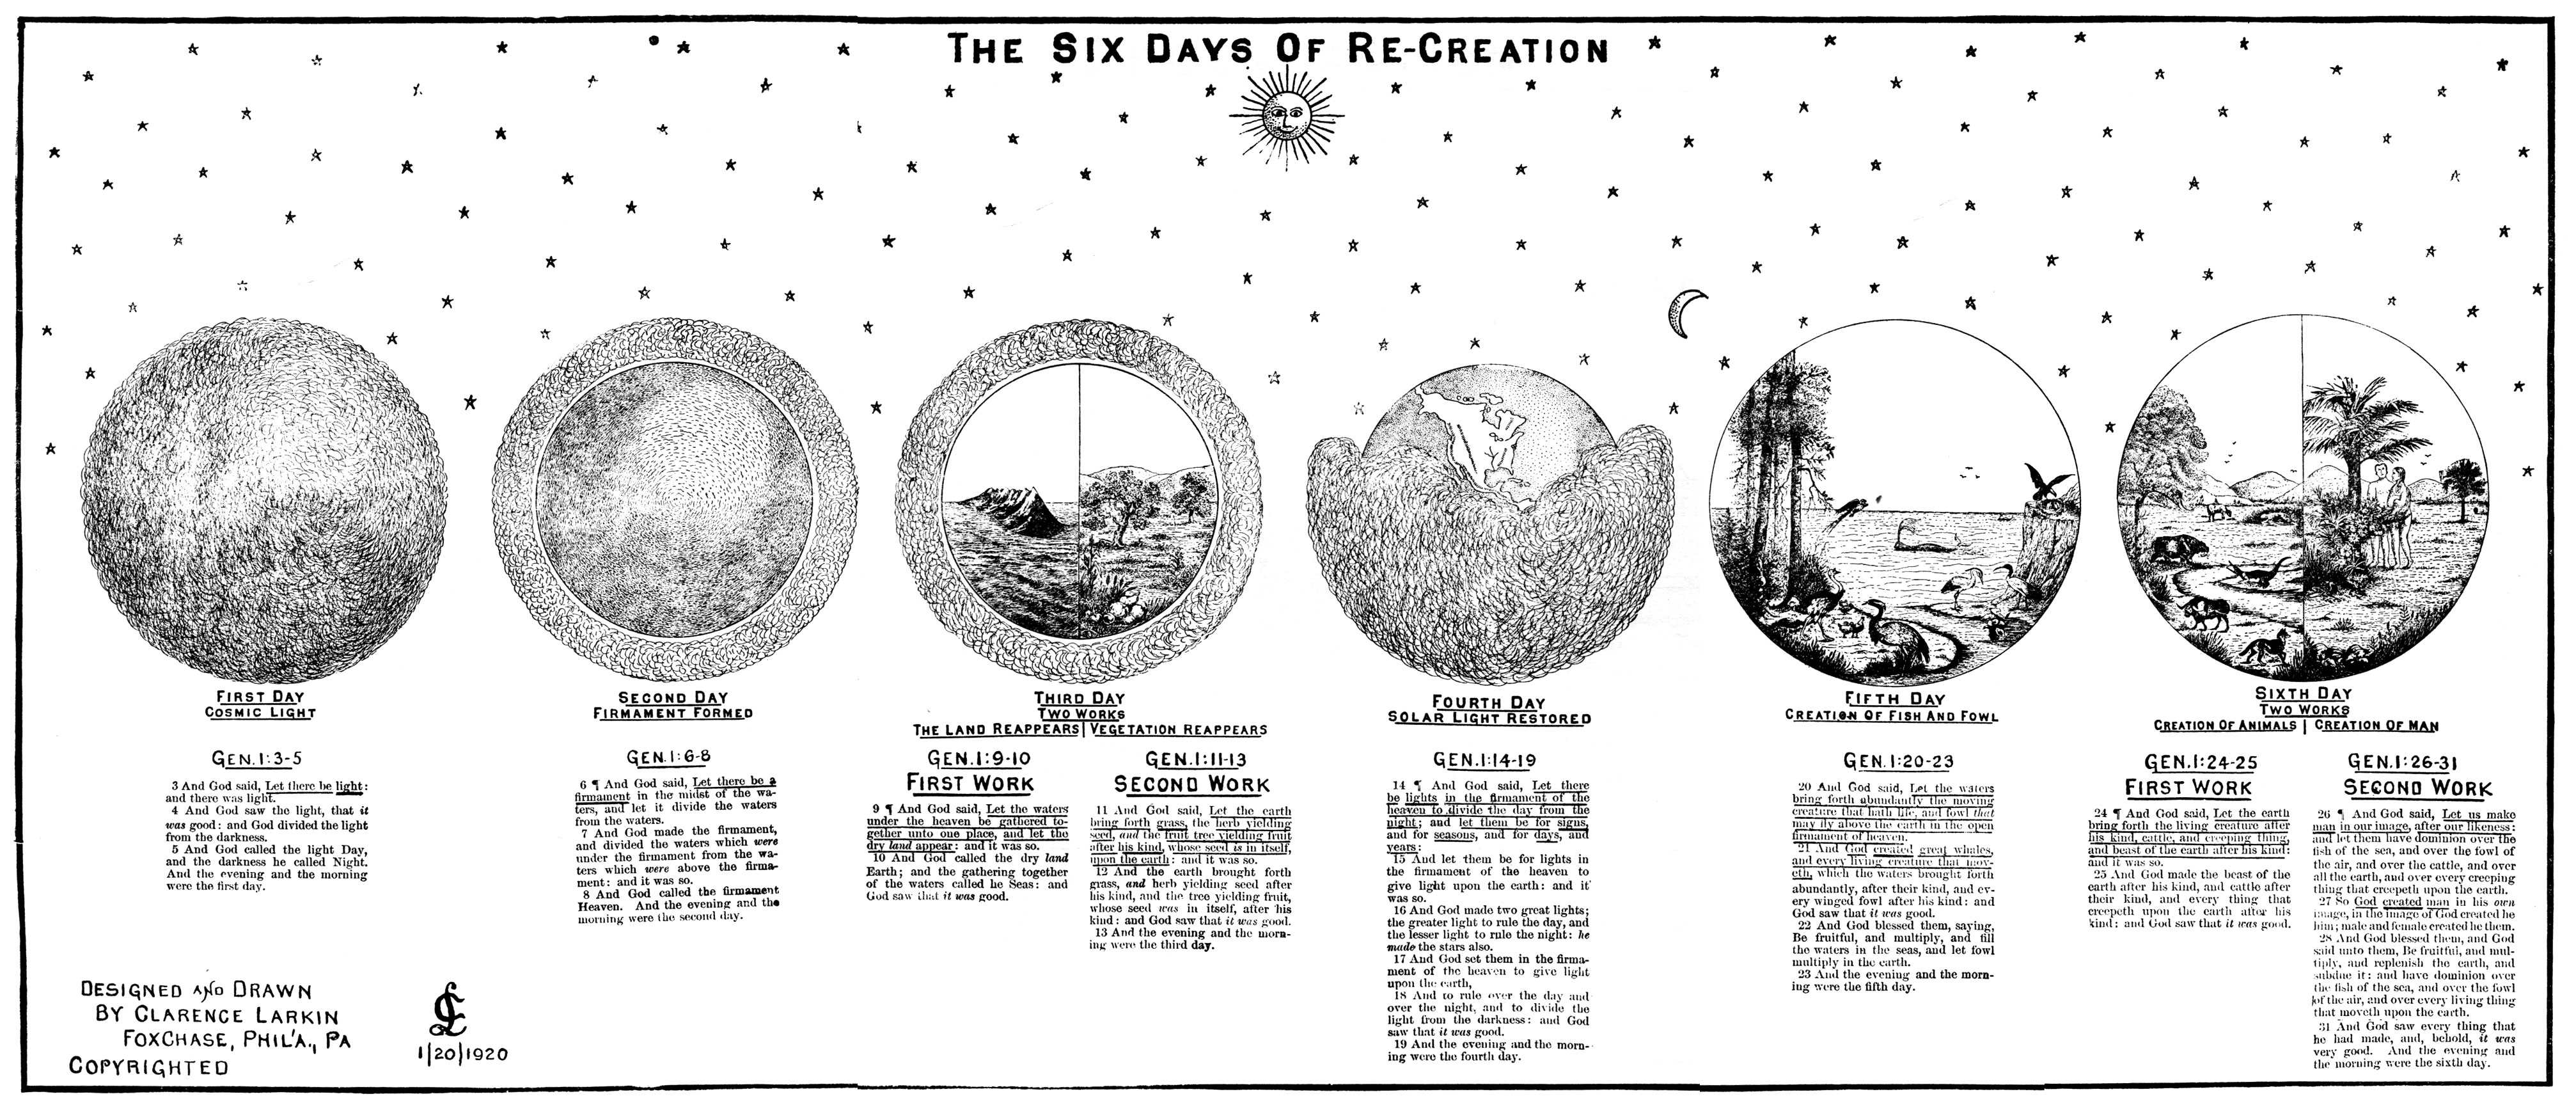 The Six Days of Re-Creation Illustration